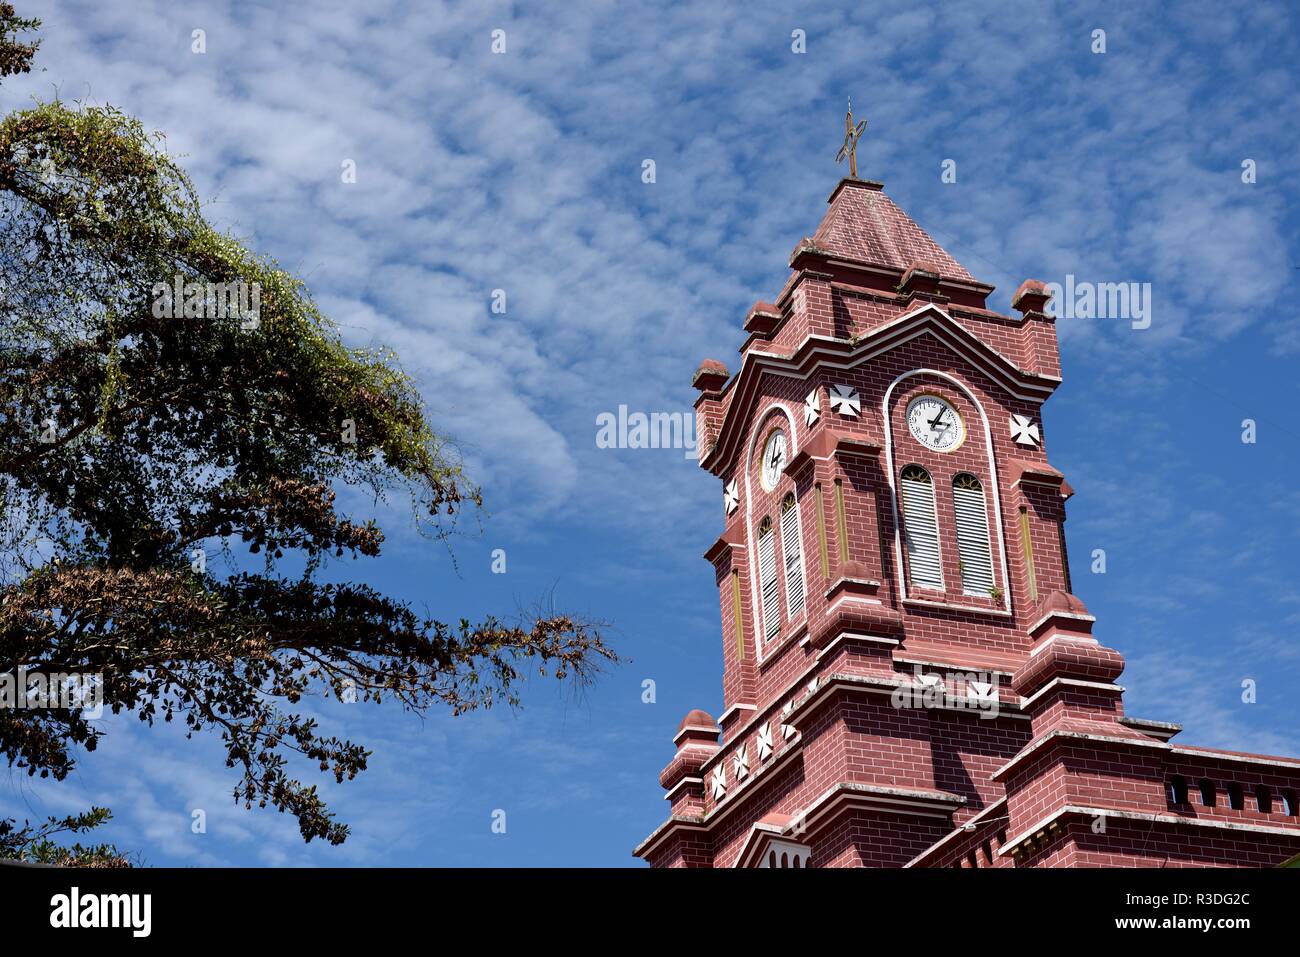 The church tower of the Iglesia San Carlos de Borromeo in the Plaza of San Carlos, The church was built between 1930 and 1940. Stock Photo